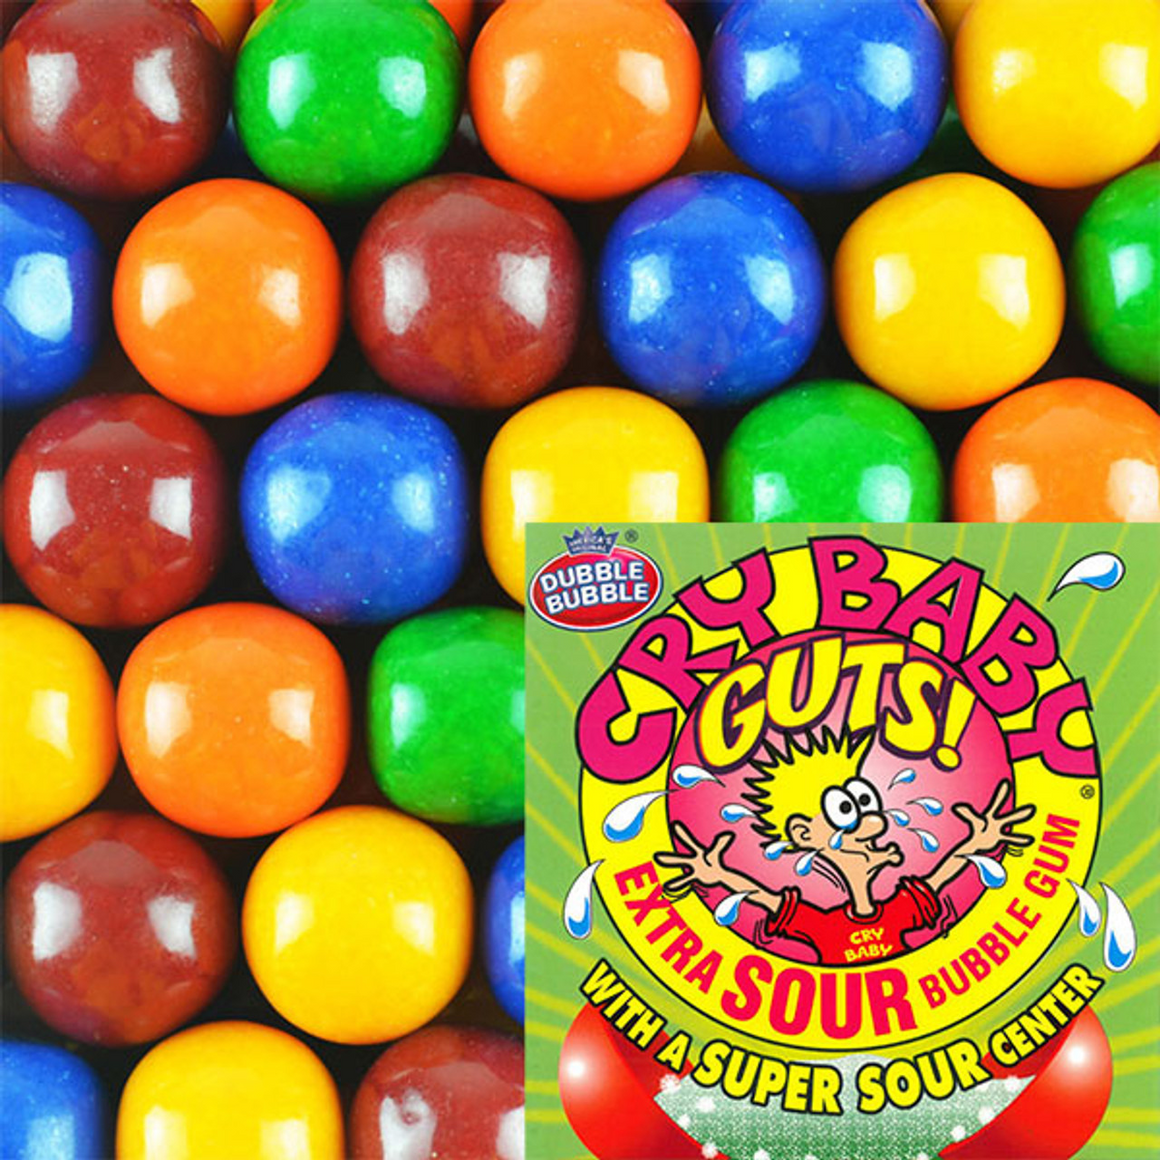 Global Gumball Double Bubble, Original Flavor, Chewing Gum - 50 Pcs Twist  Wrapped Gum - 12 Oz Individually Wrapped Bubblegum - Chewing Bubble Gum